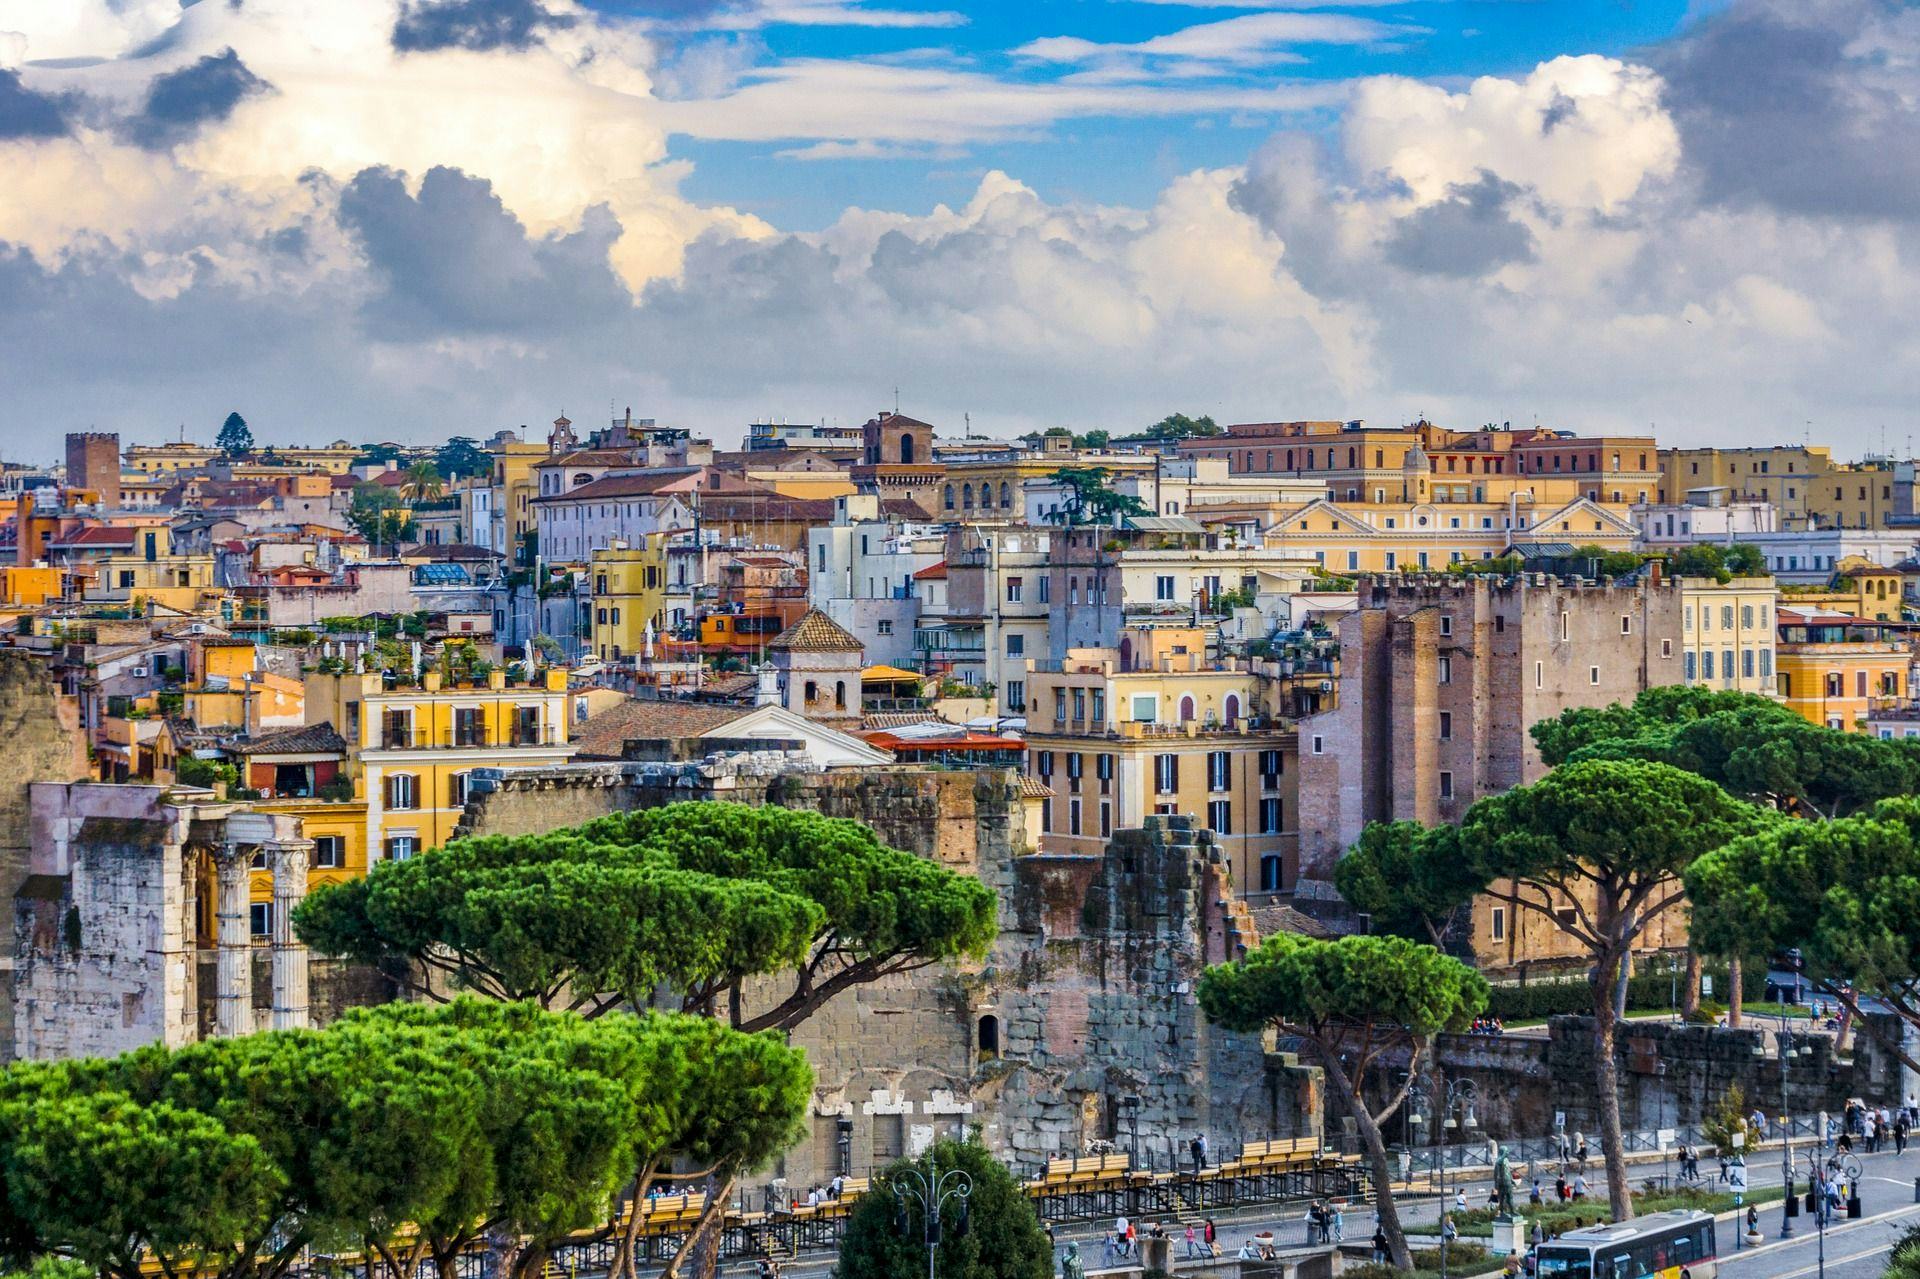 https://ghost.helloskip.com/blog/content/images/2020/08/MaxPixel.net-Rome-Houses-Vacations-Italy-Building-Travel-City-4087275.jpg